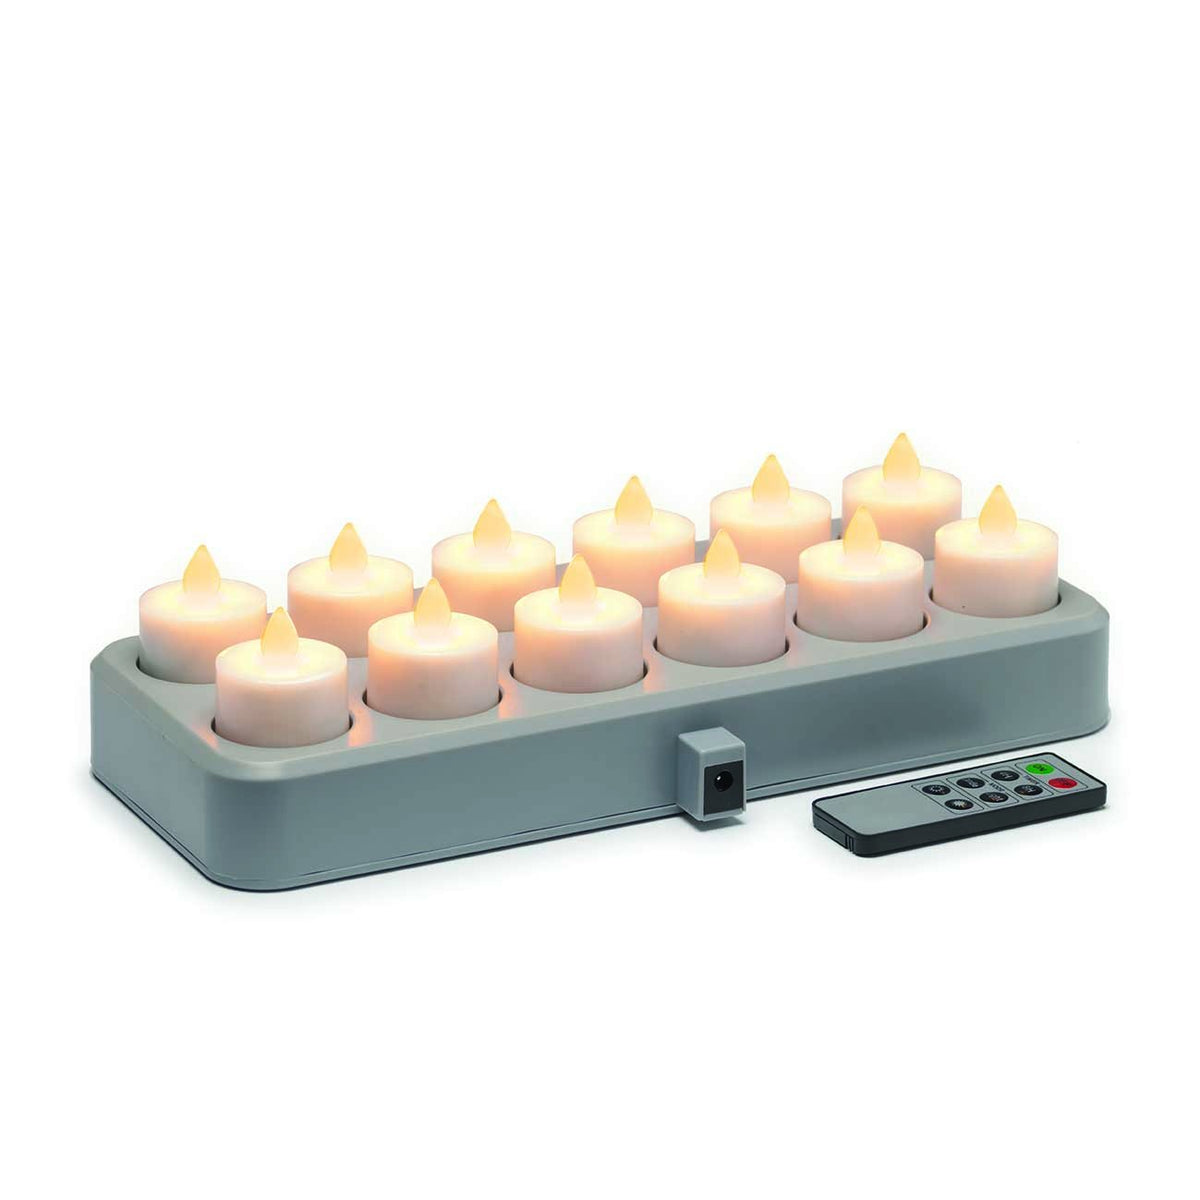 Remote Controlled set of 12 Rechargeable LED Flicker Tealights in Candlelight Colour